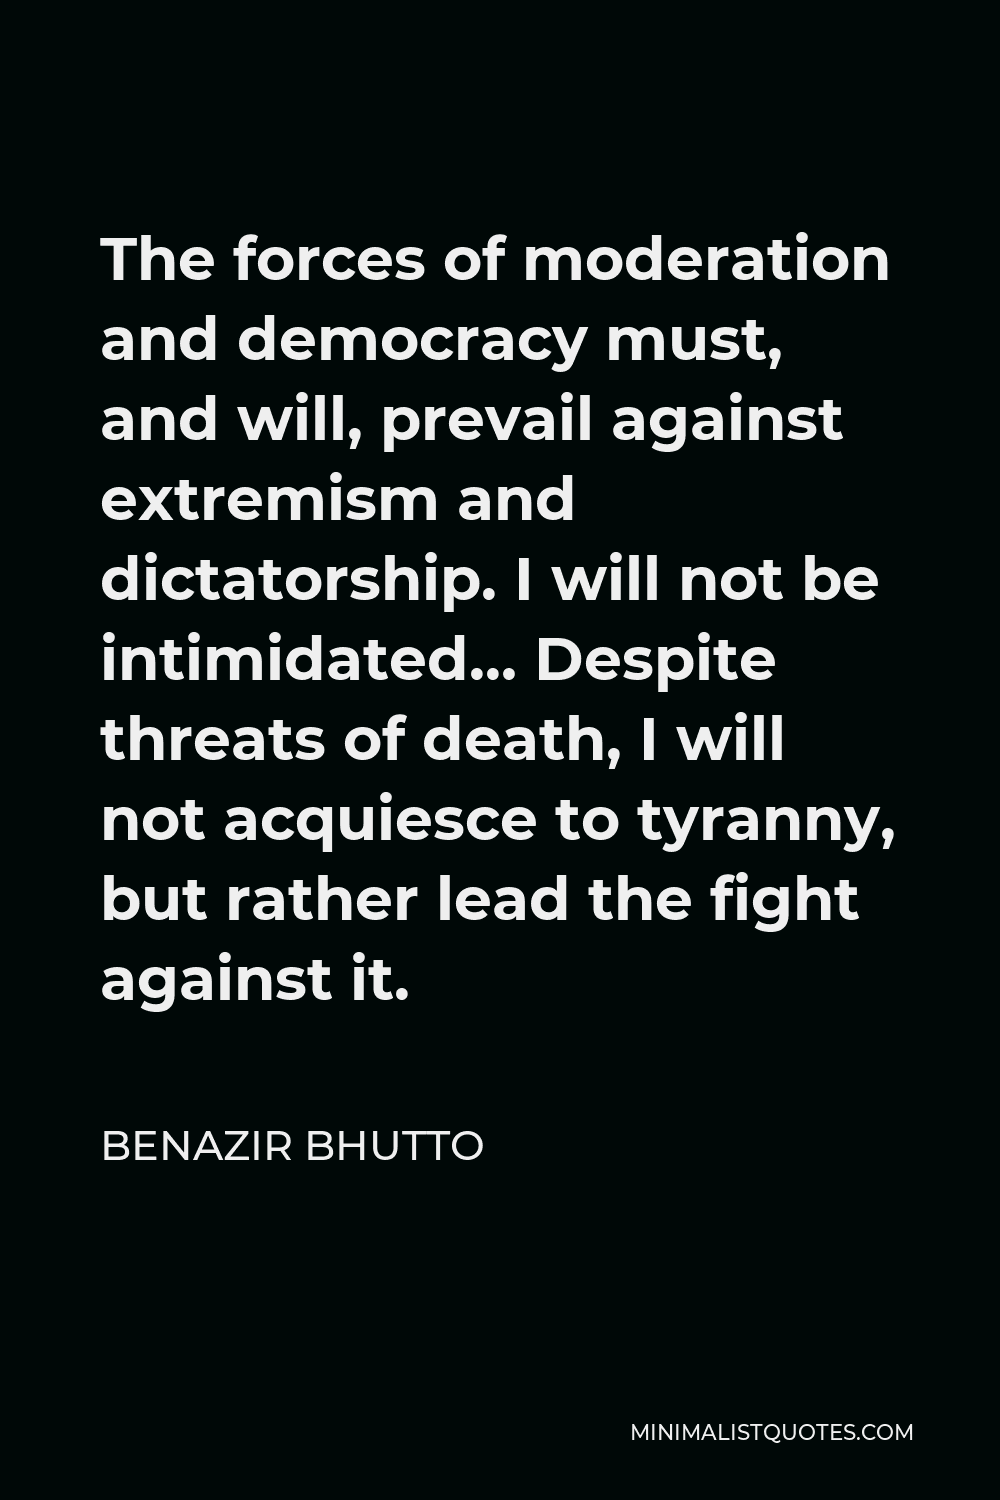 Benazir Bhutto Quote - The forces of moderation and democracy must, and will, prevail against extremism and dictatorship. I will not be intimidated… Despite threats of death, I will not acquiesce to tyranny, but rather lead the fight against it.